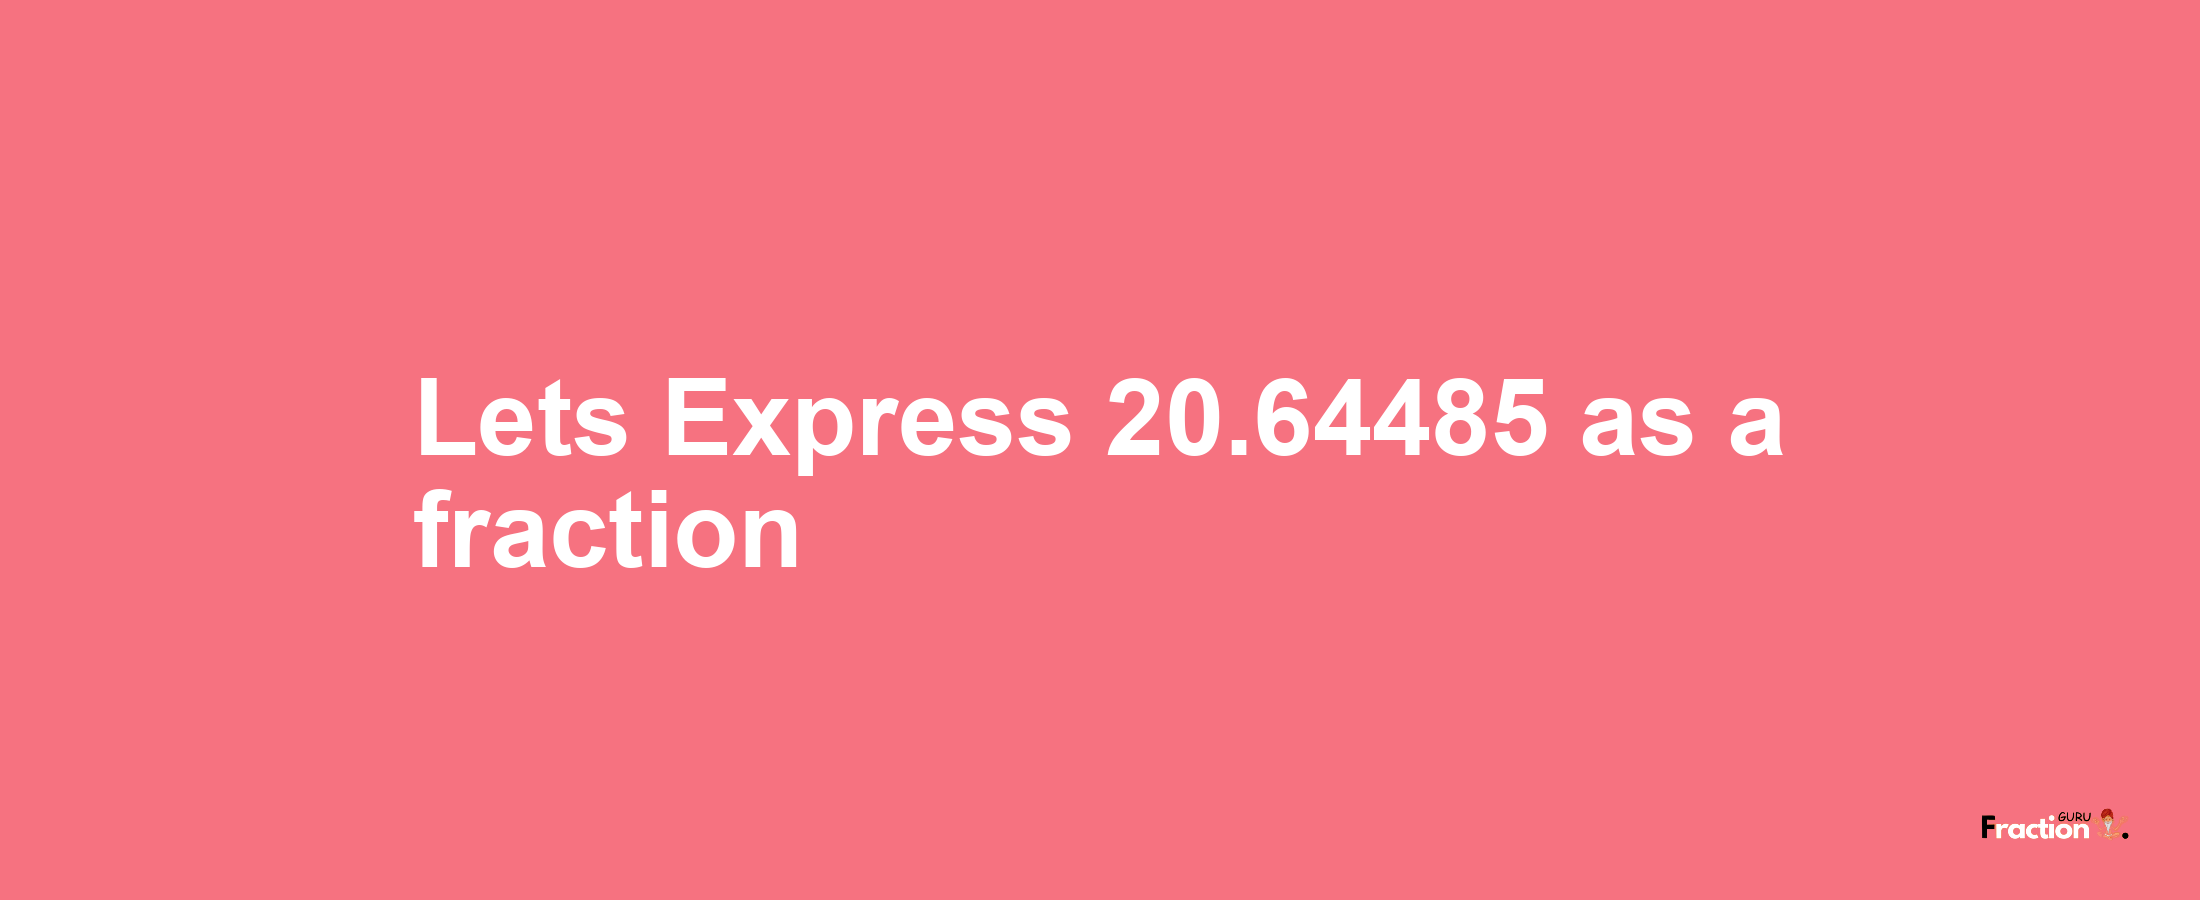 Lets Express 20.64485 as afraction